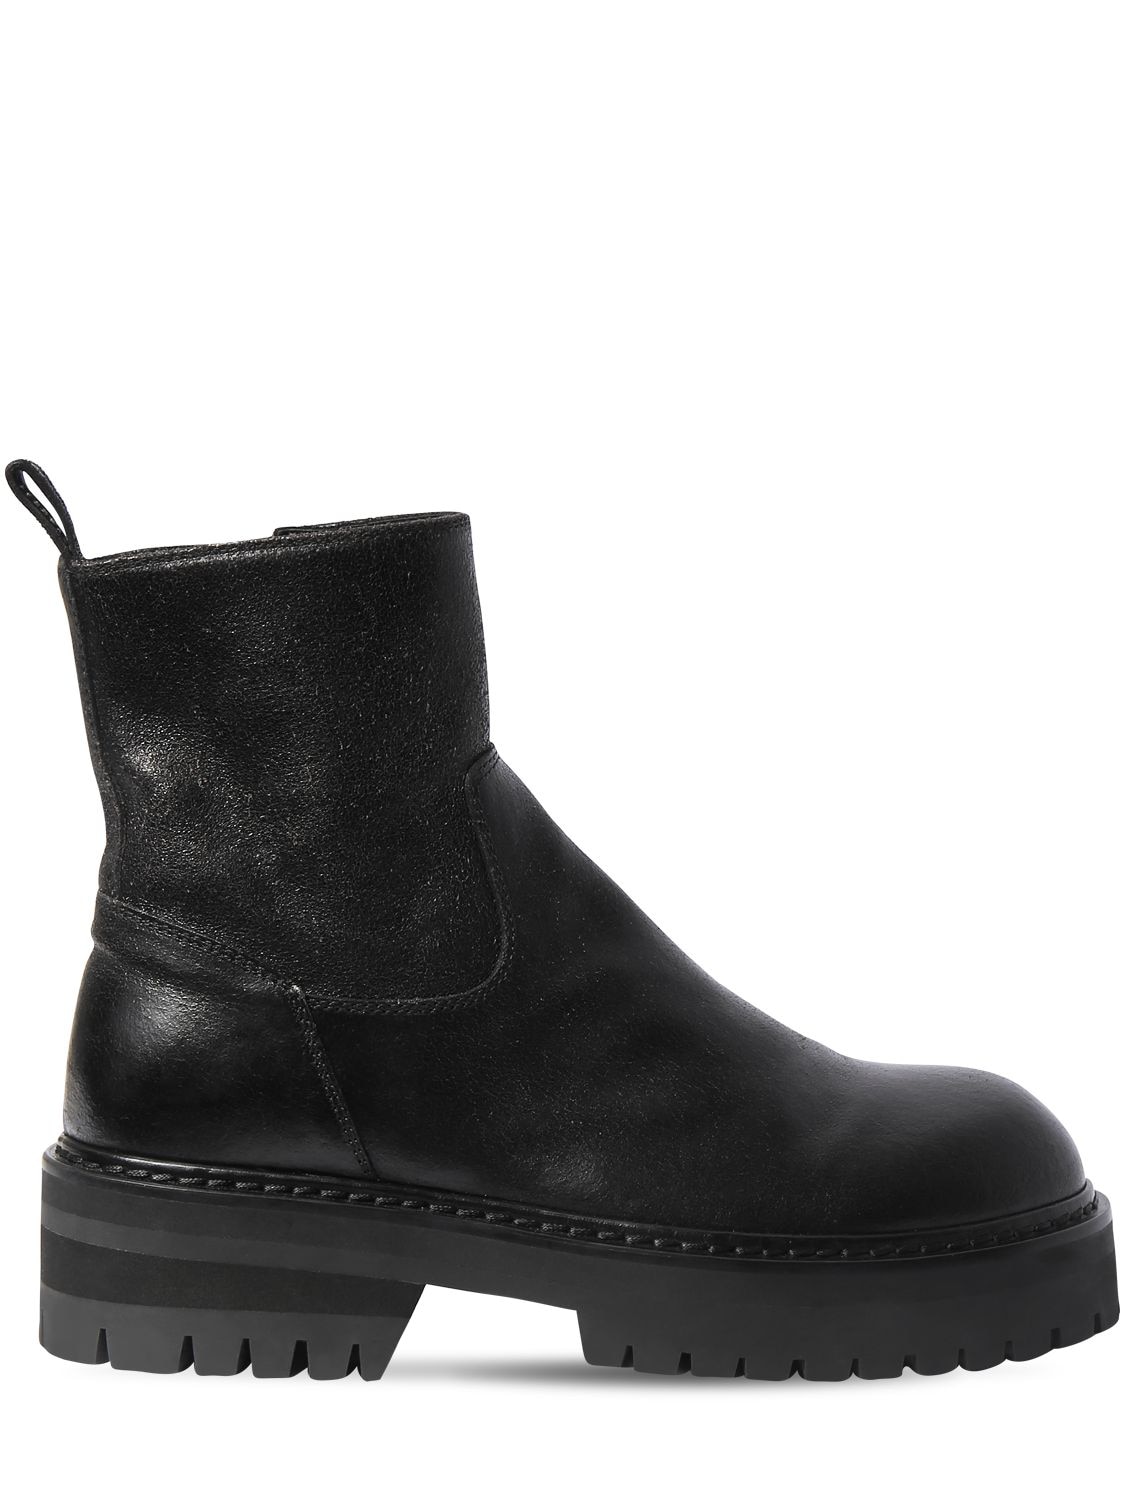 ANN DEMEULEMEESTER 50MM LEATHER ANKLE BOOTS,72I51K001-MDK50